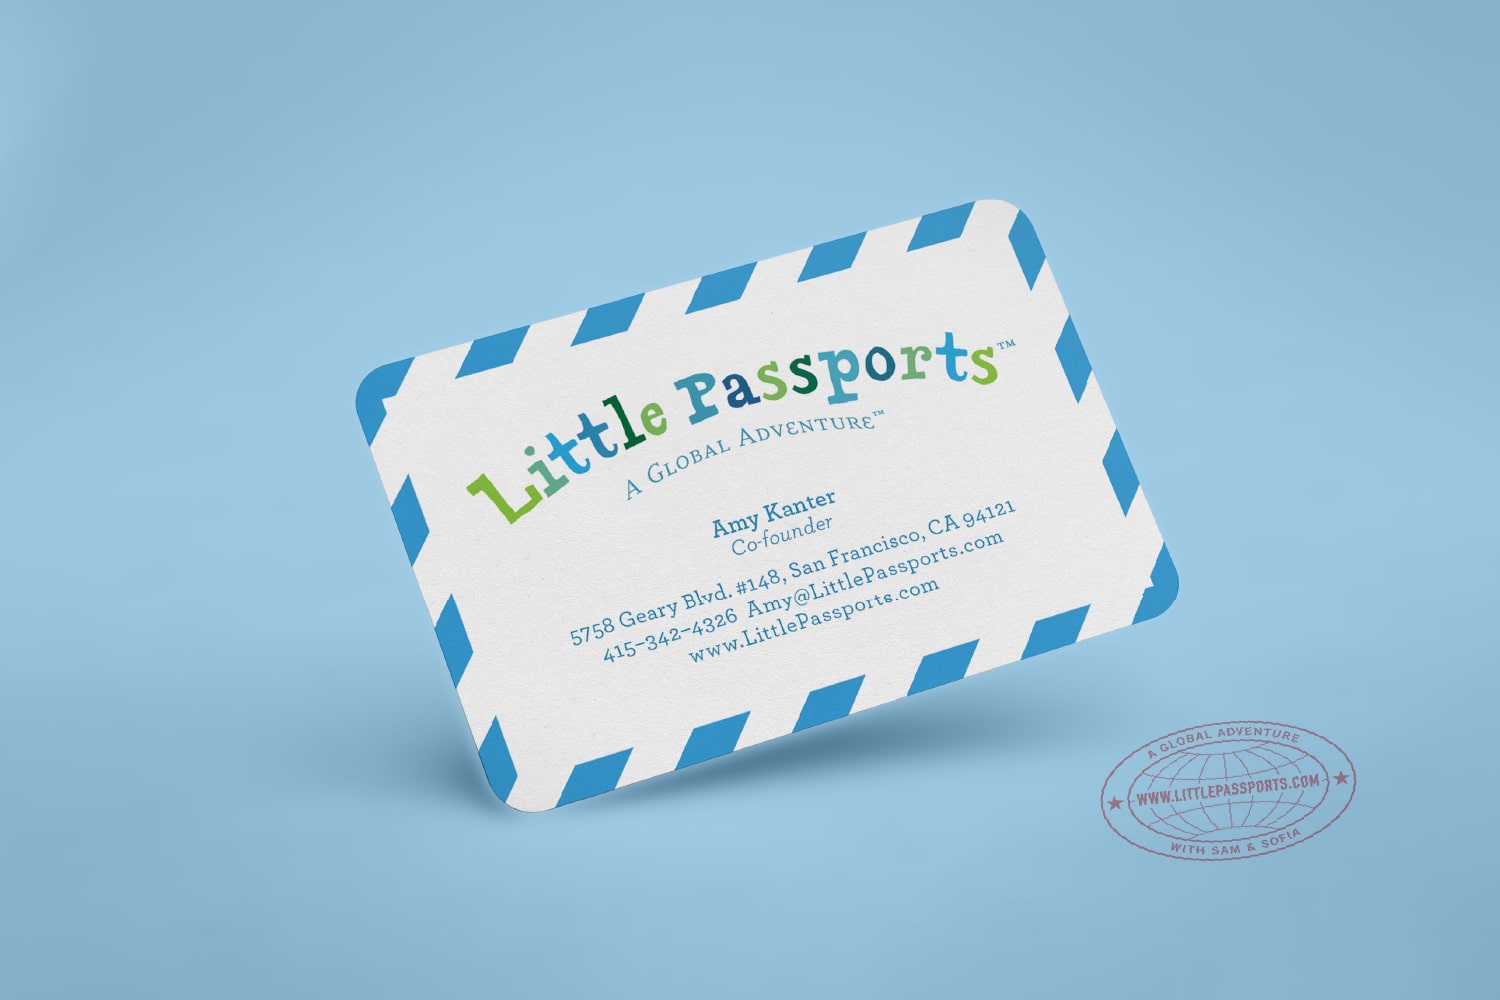 Little Passports co-founder Amy Norman's busienss card.